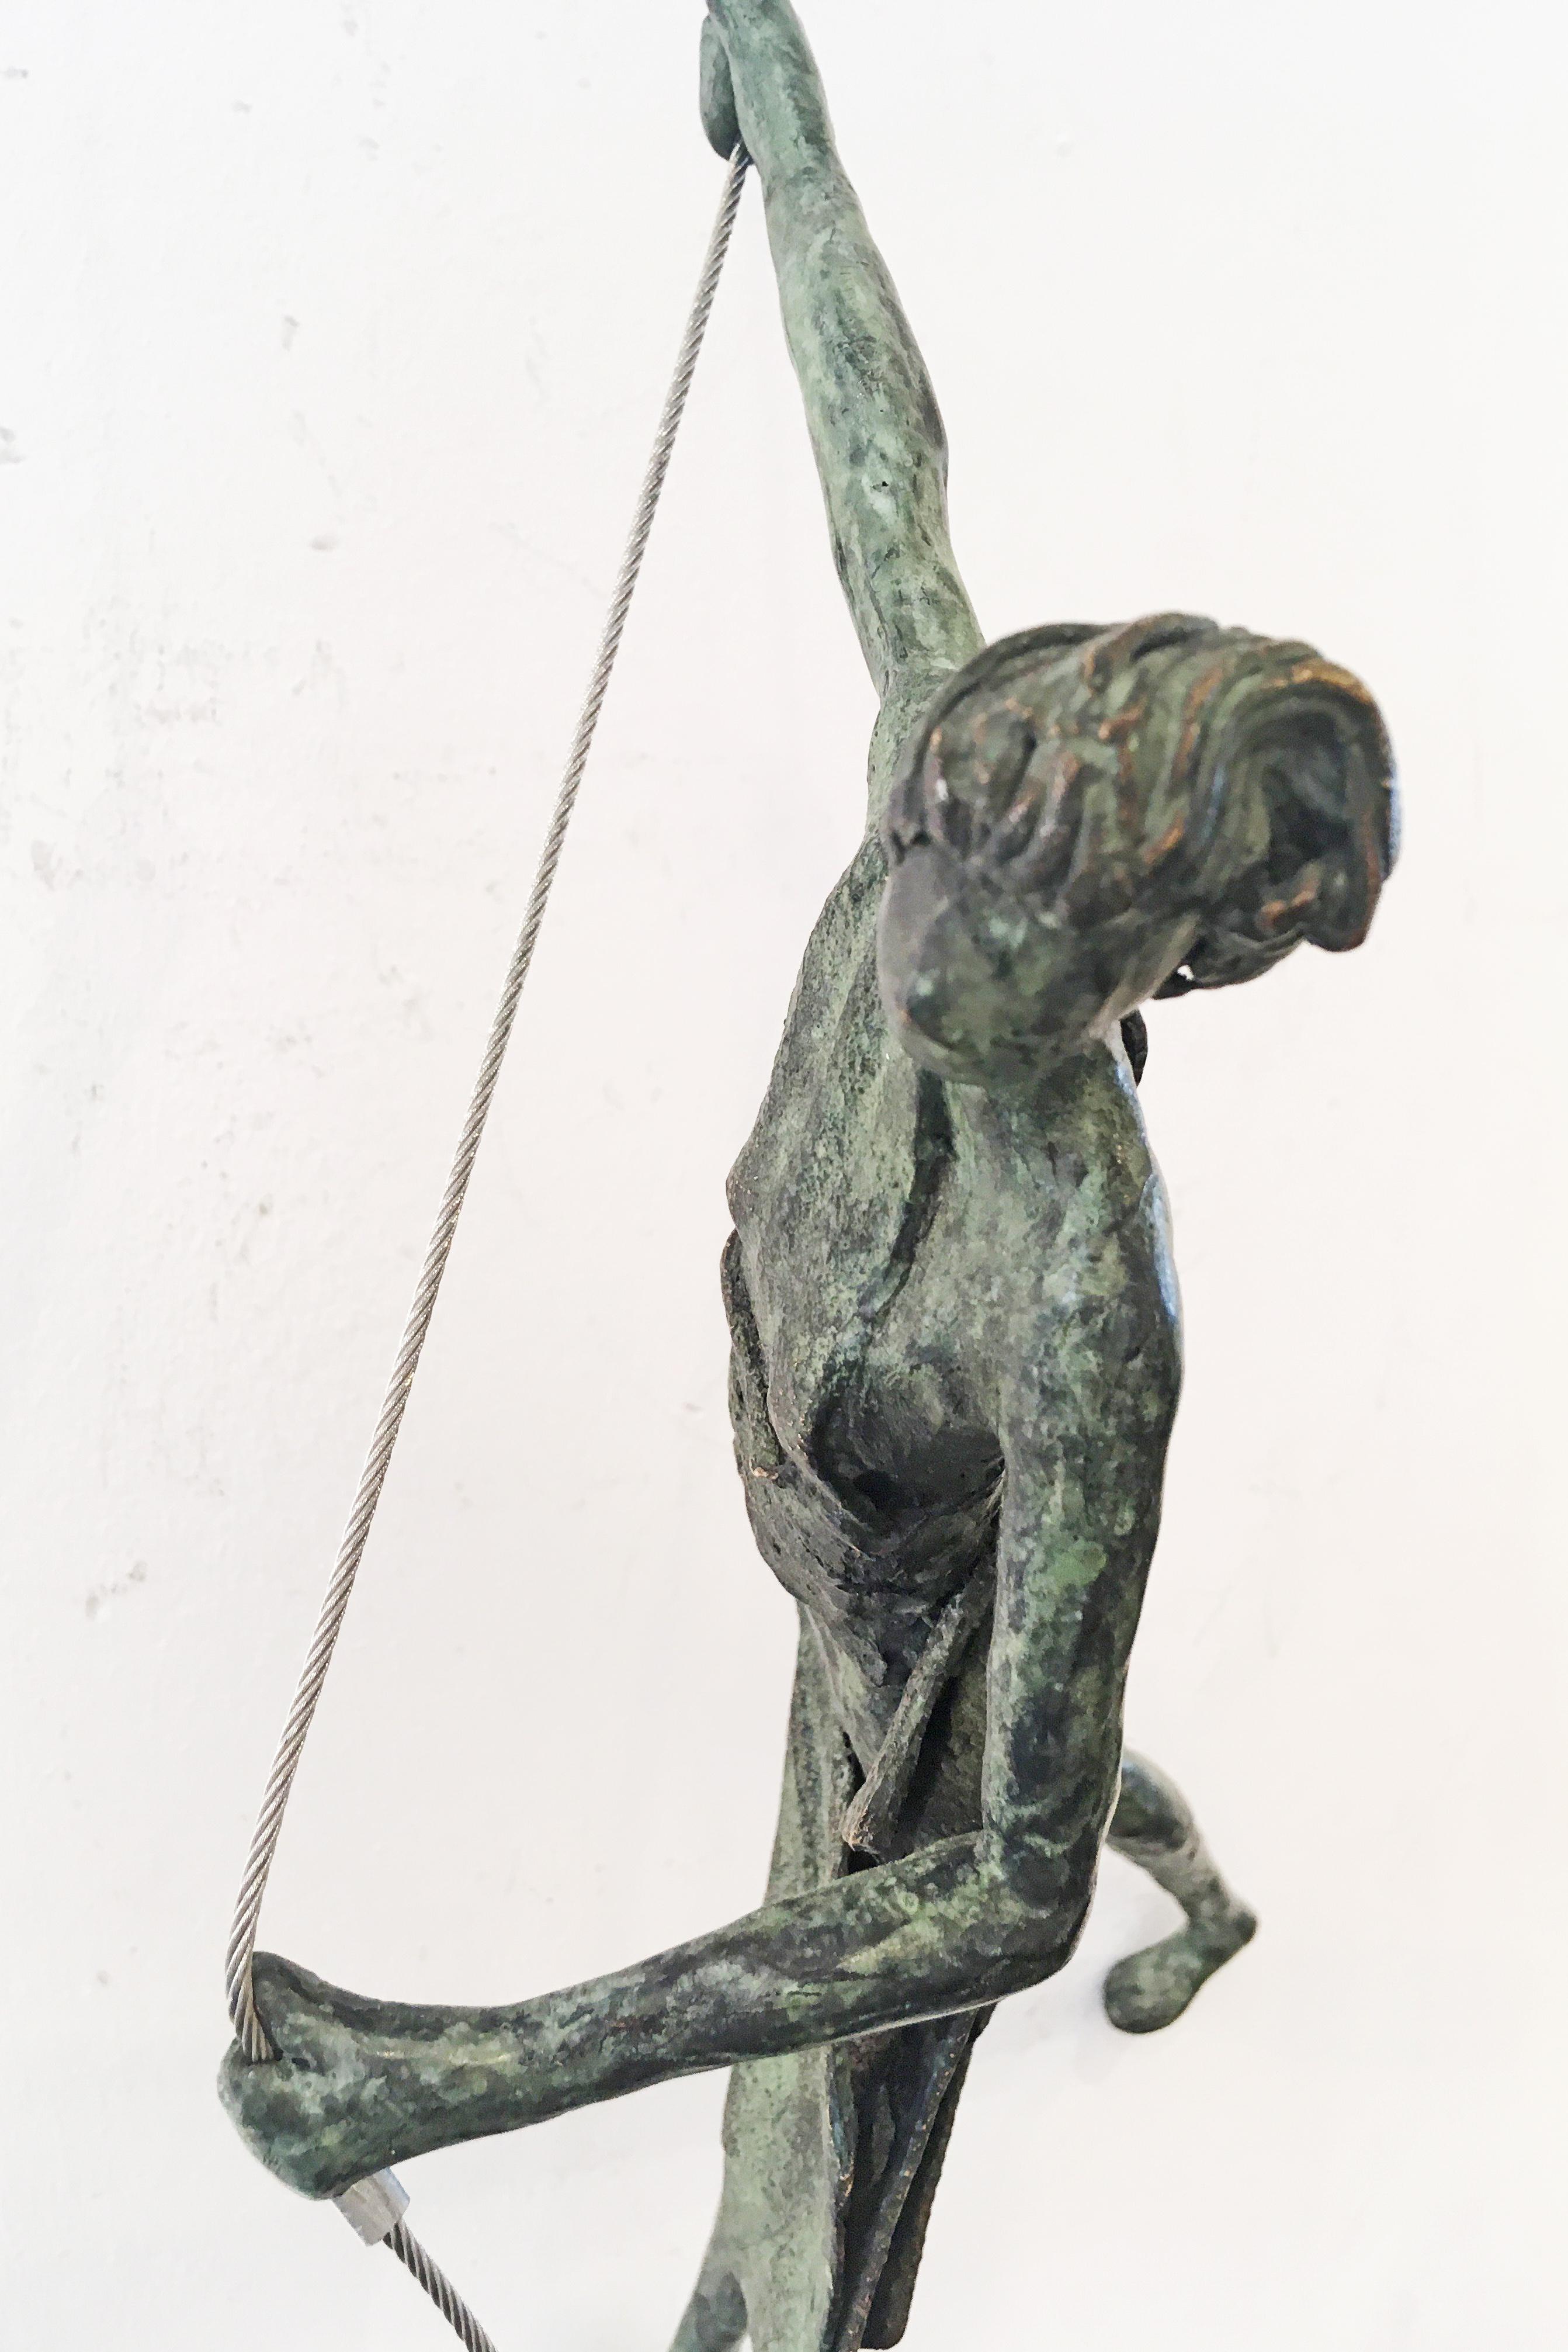 Acrobat - Legs on the wall (code 3409) - Gold Figurative Sculpture by Anke Birnie